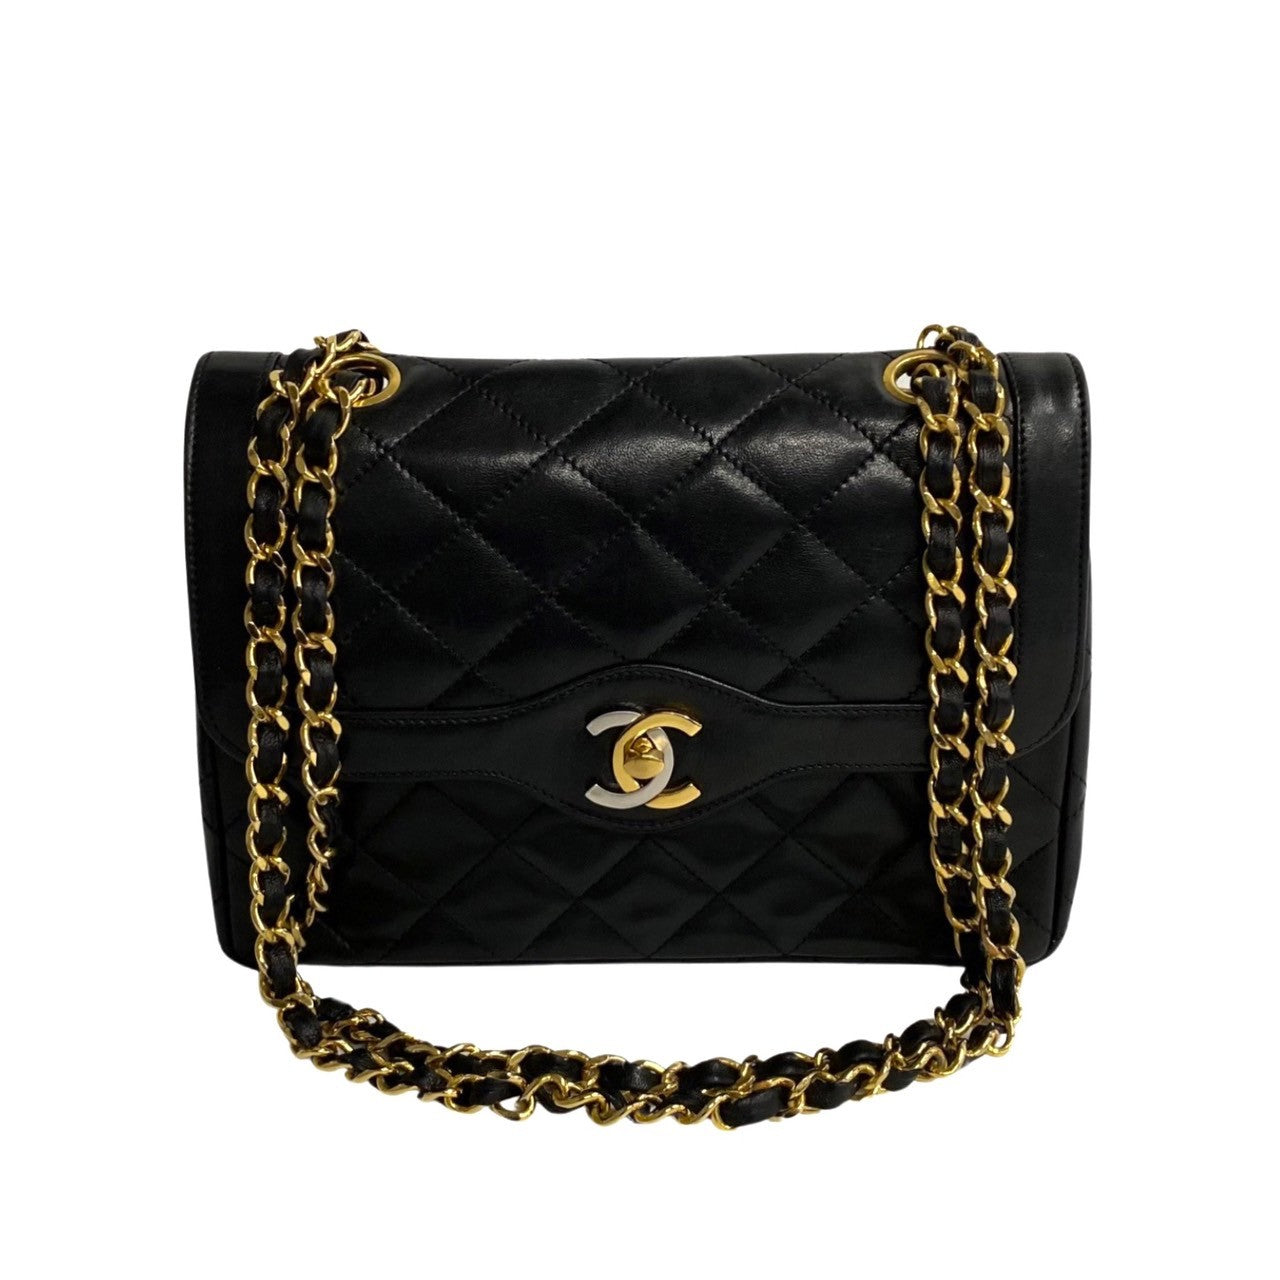 Chanel Paris Double Flap Bag Leather Crossbody Bag in Good condition